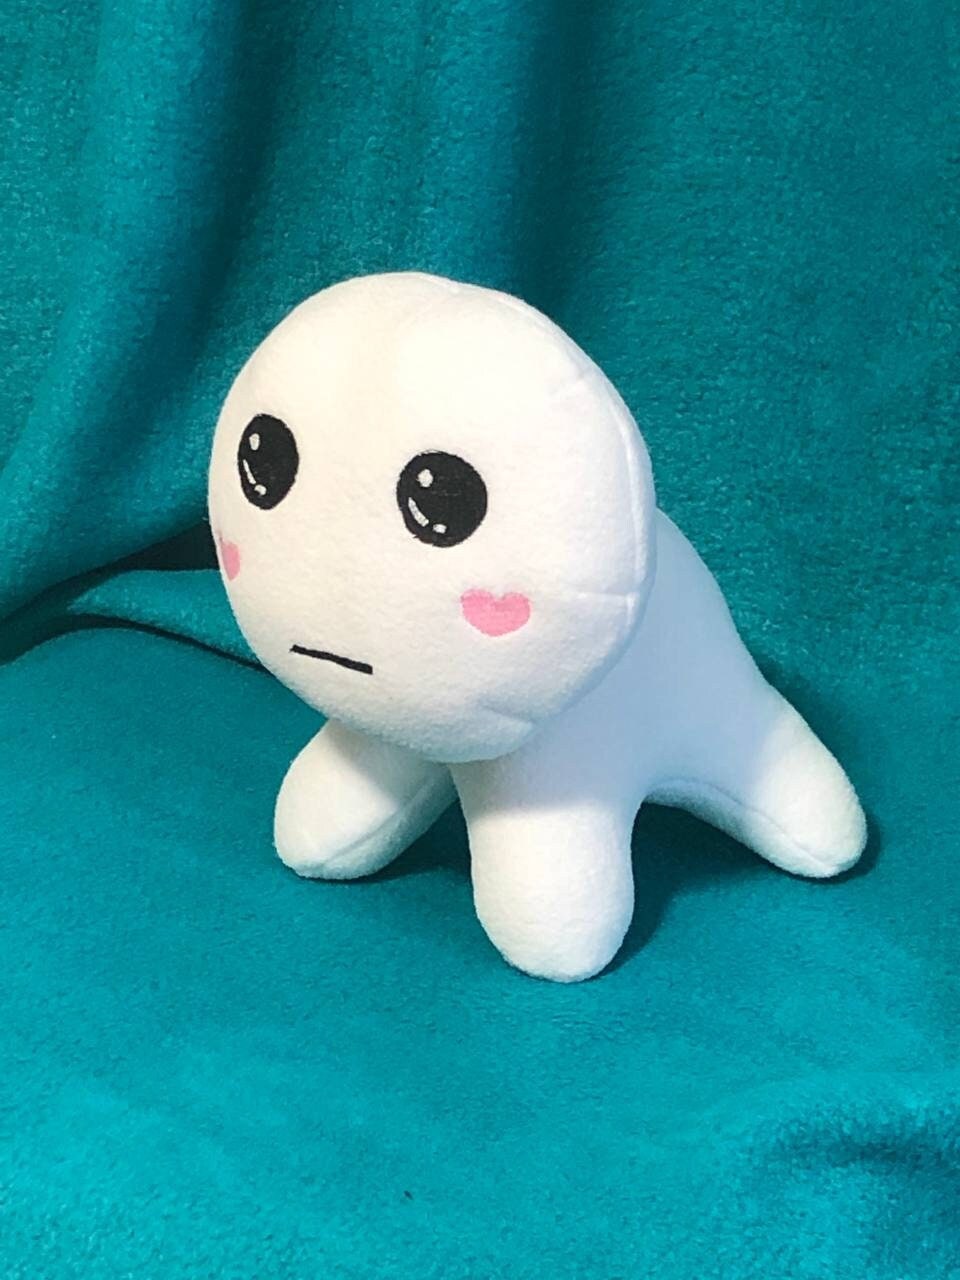 tbh Autism Creature Plush White Yipee Creature Plush Toy, TBH Creature  Stuffed Animal Yipeeee Plushie Doll for Boys Girls Kids Birthday Gift